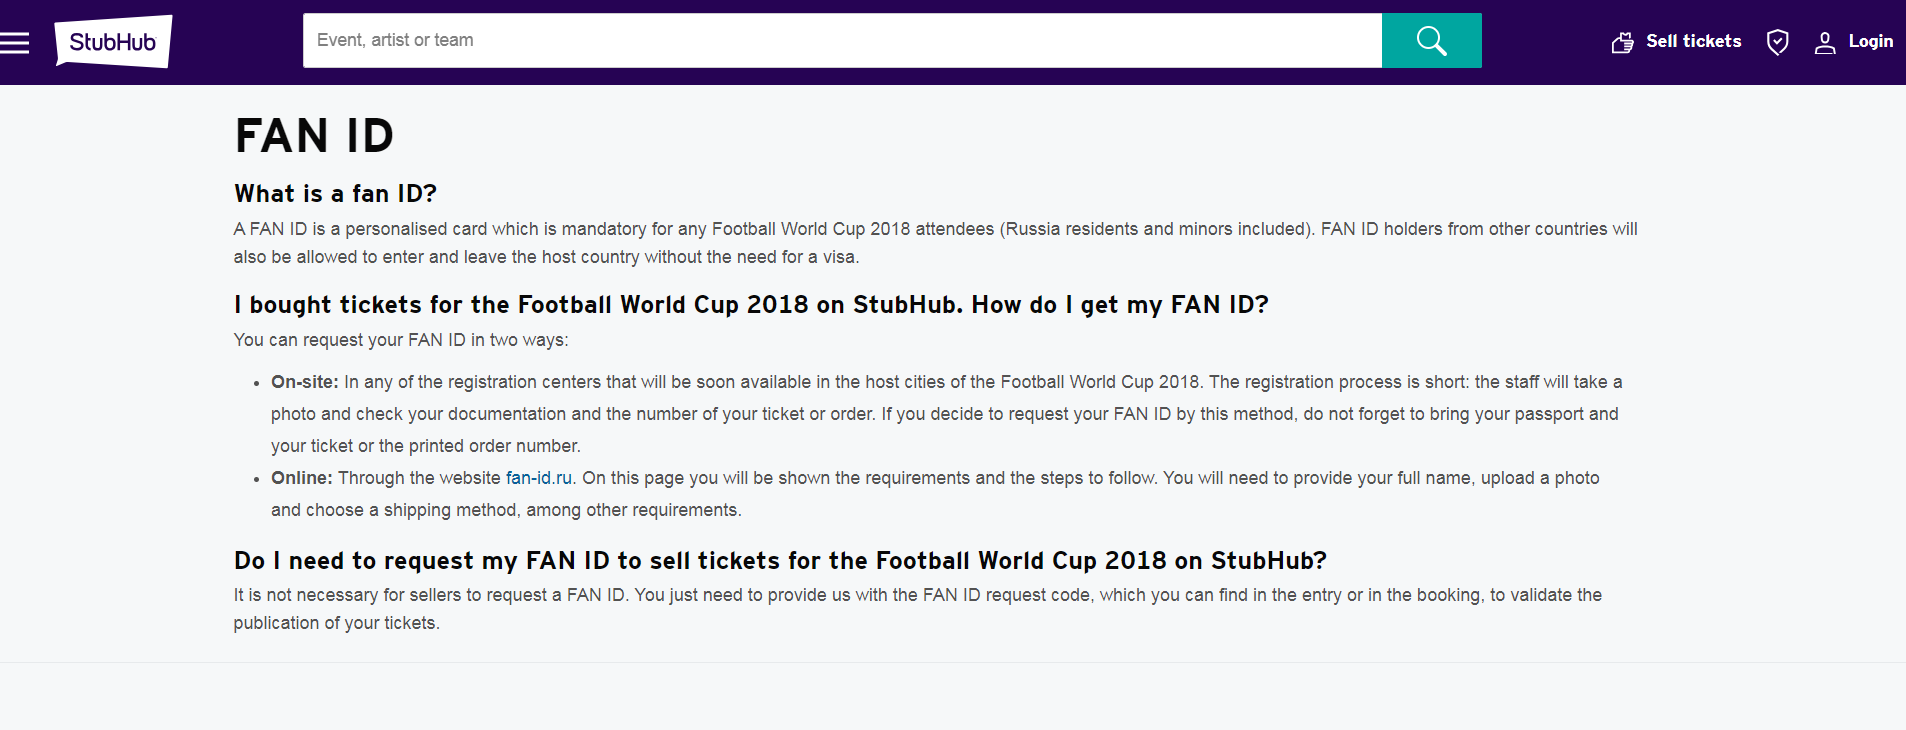 FIFA World Cup 2018 Ticket Resale